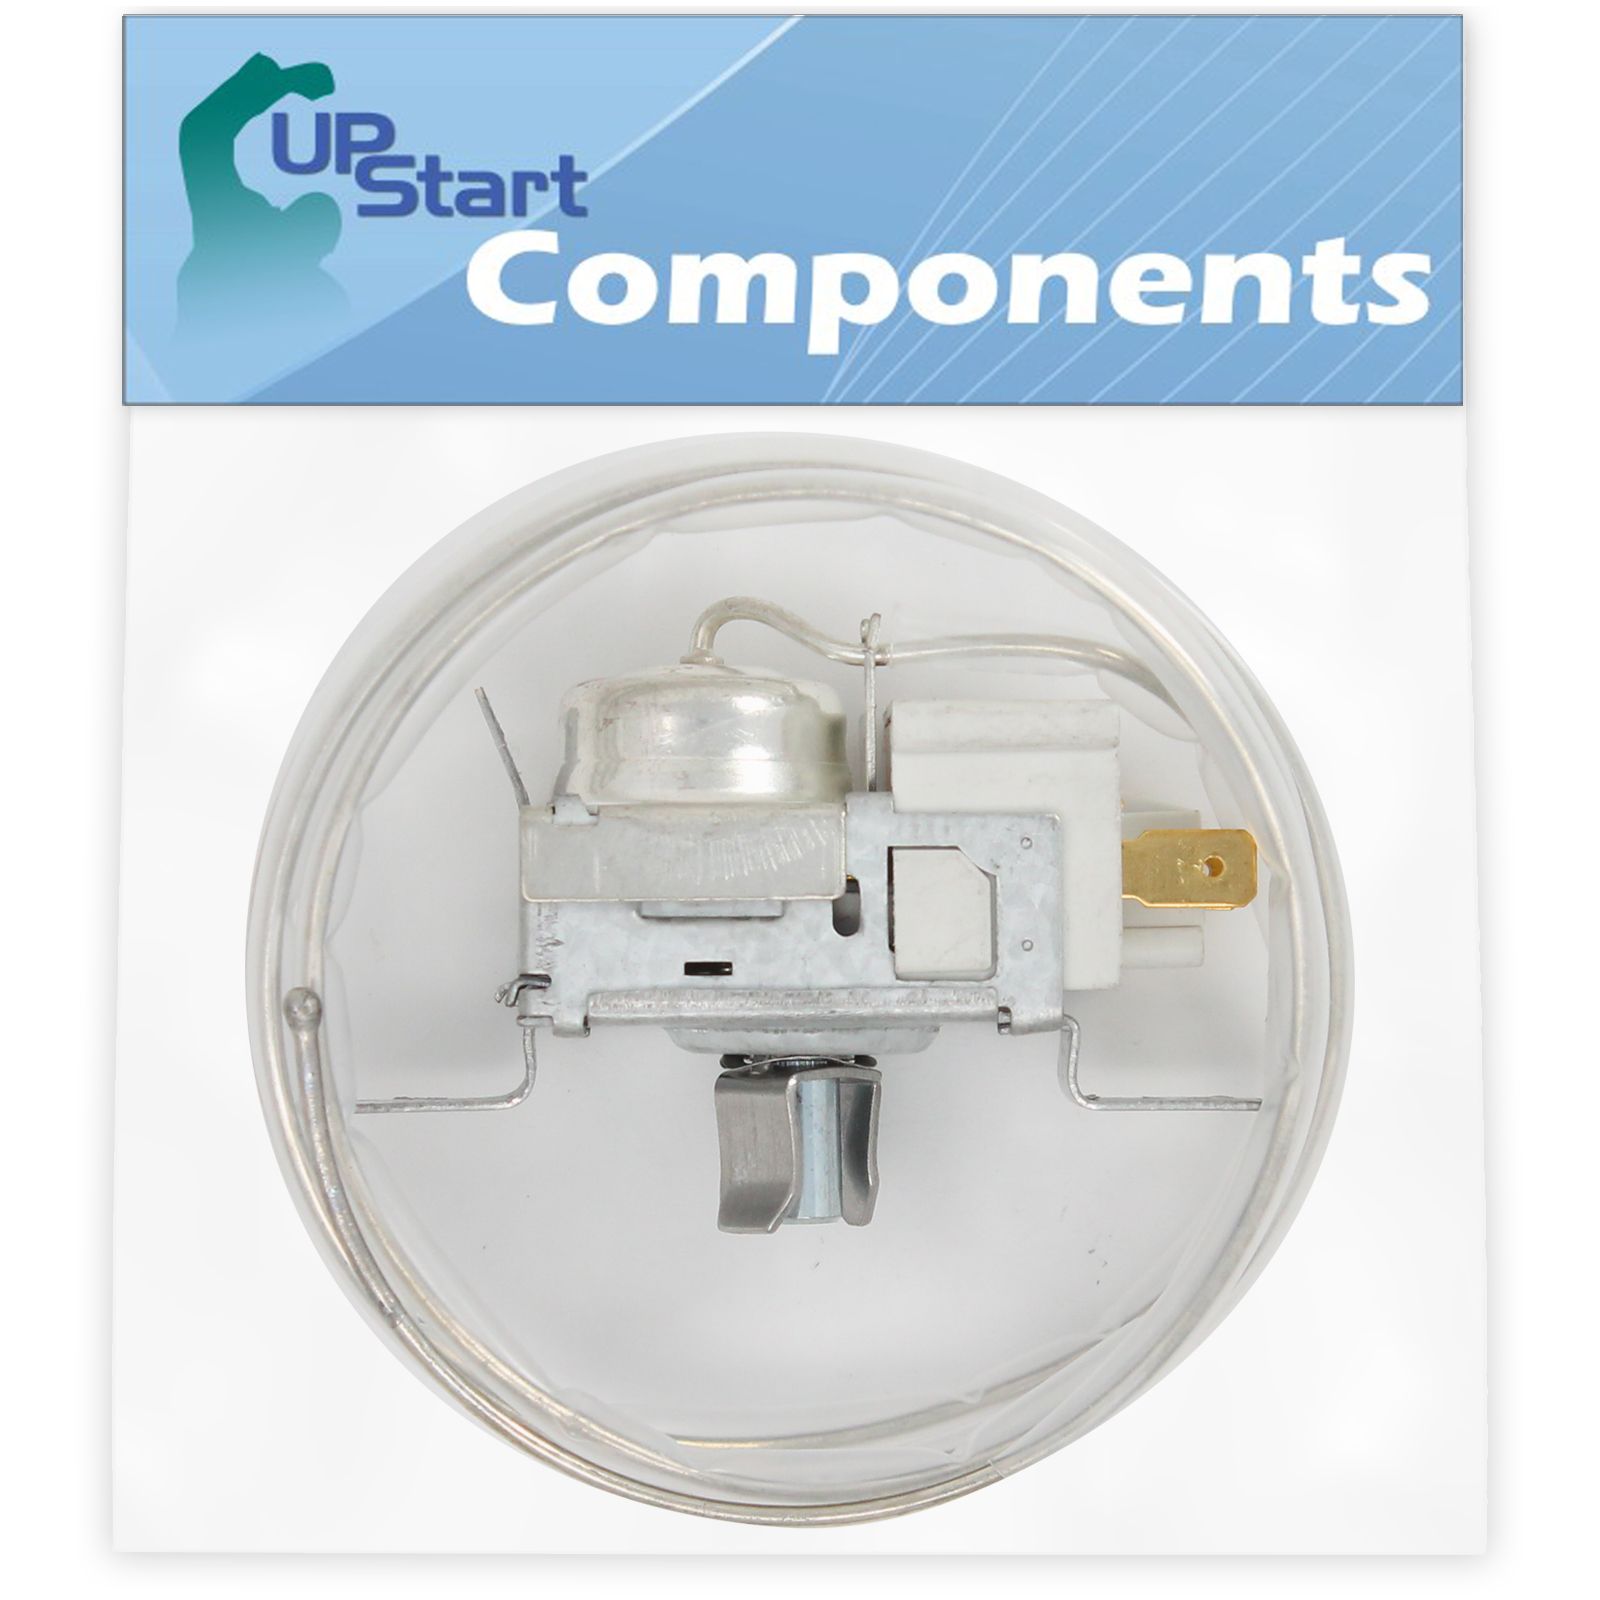 2198202 Cold Control Thermostat Replacement for Whirlpool ED25DQXBB00 Refrigerator - Compatible with WP2198202 Refrigerator Temperature Control Thermostat - UpStart Components Brand - image 1 of 3